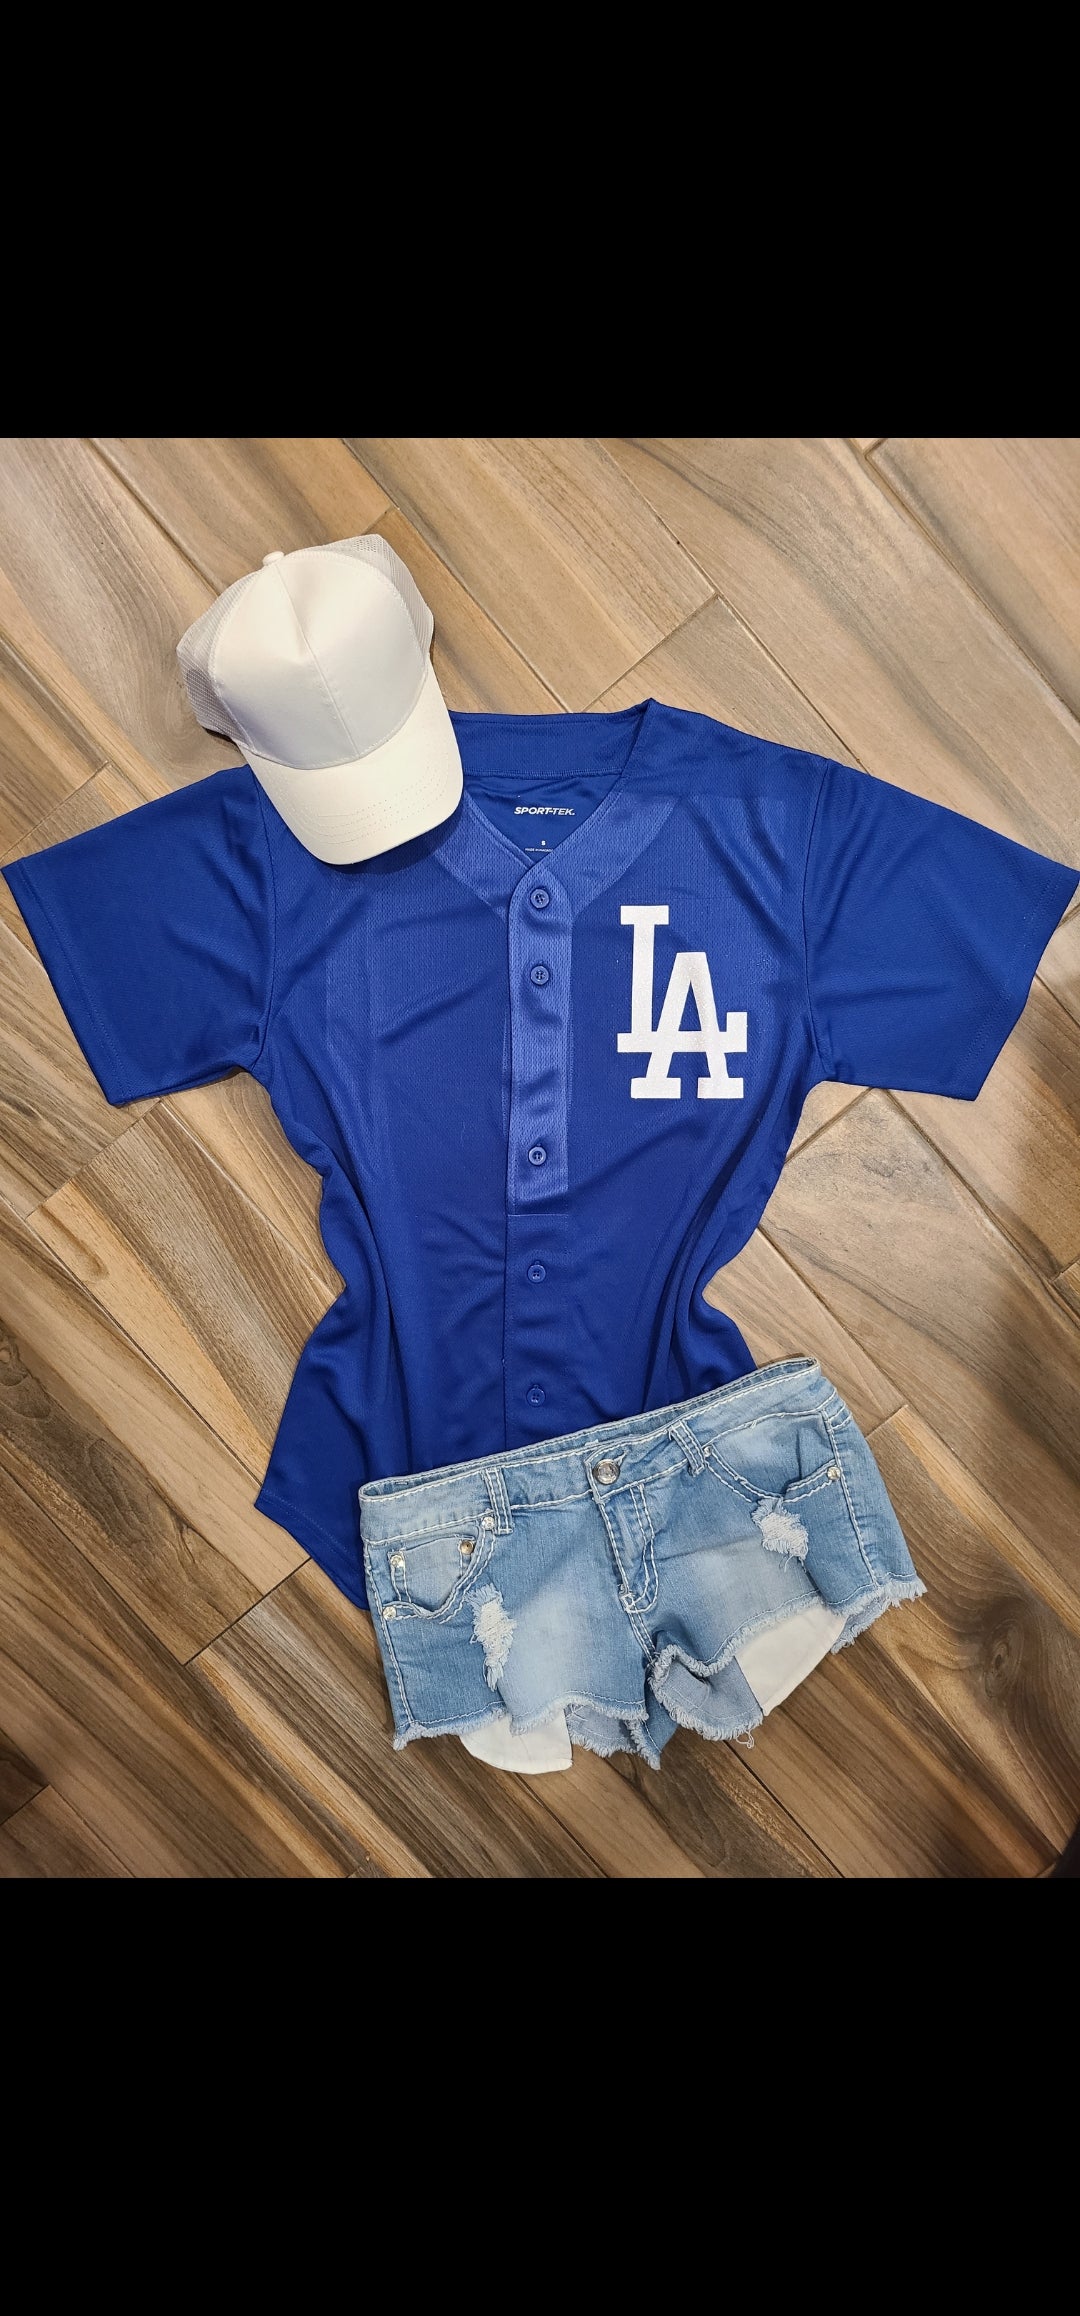 Dodgers All Star Game Gold Edition Jersey Size S M L XL XXL for